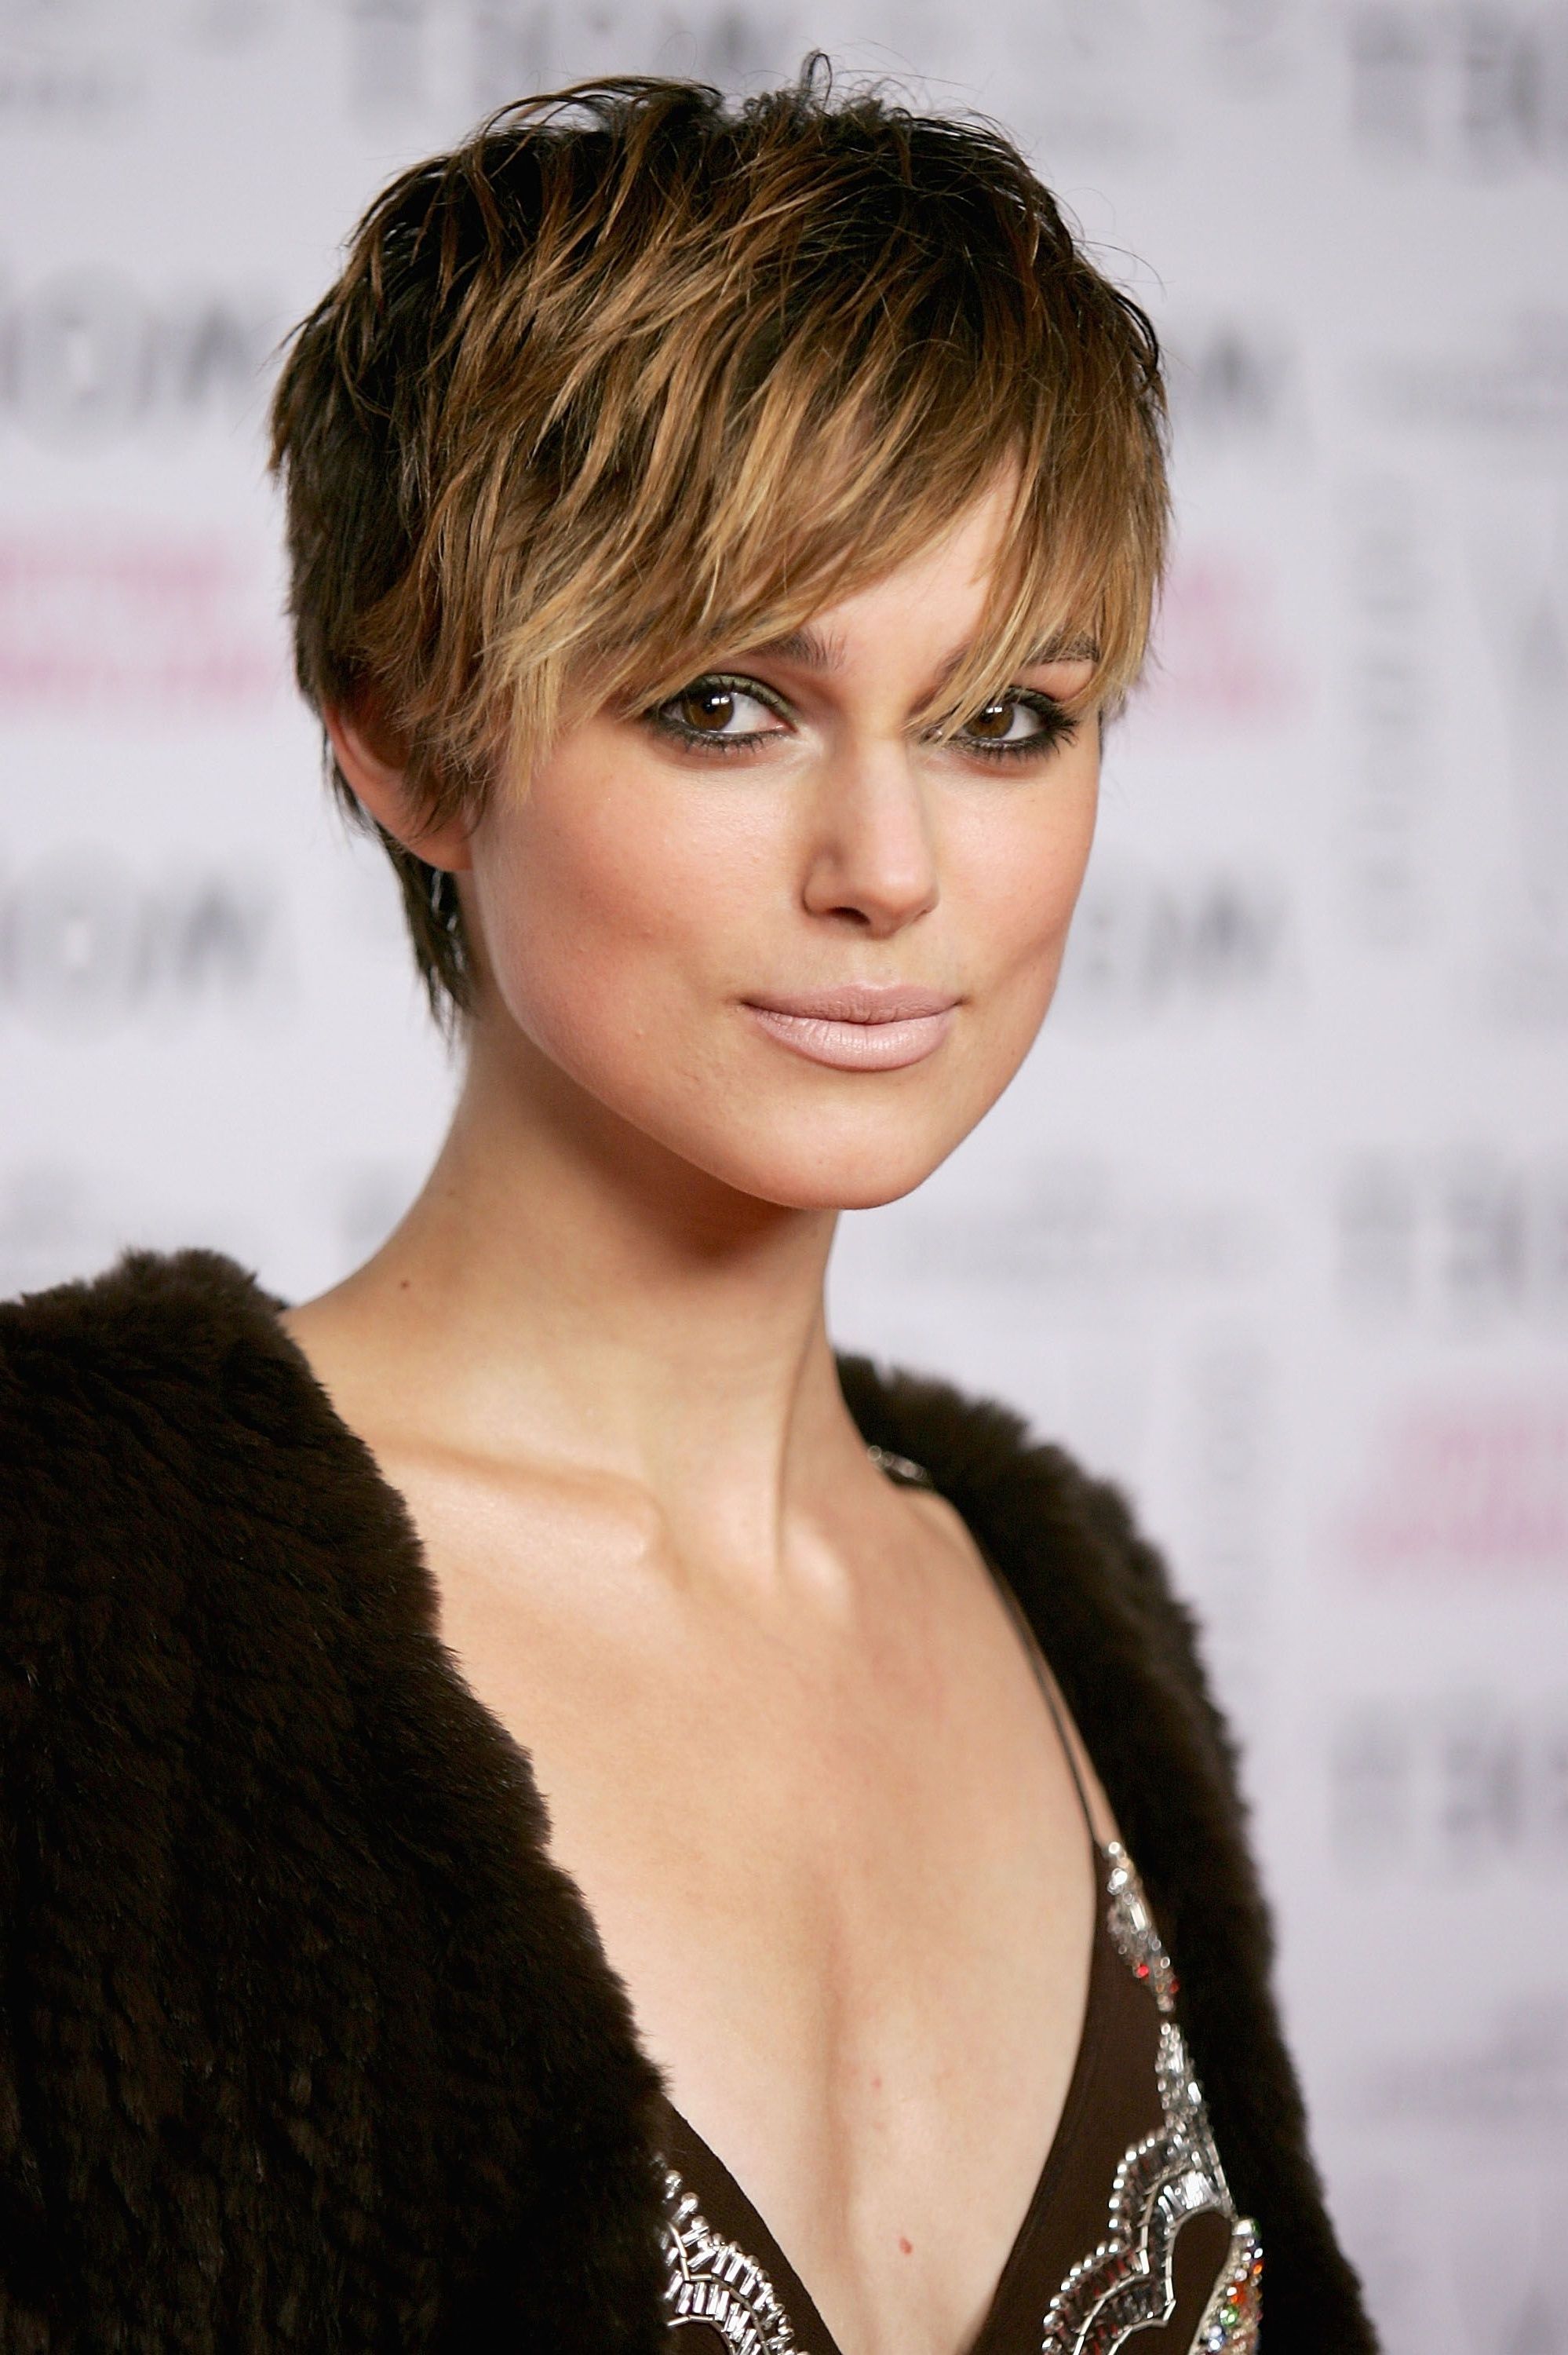 53 Best Pixie Cut Hairstyle Ideas 2018 – Cute Celebrity Pixie Haircuts Within Most Current Choppy Pixie Fade Haircuts (View 13 of 15)